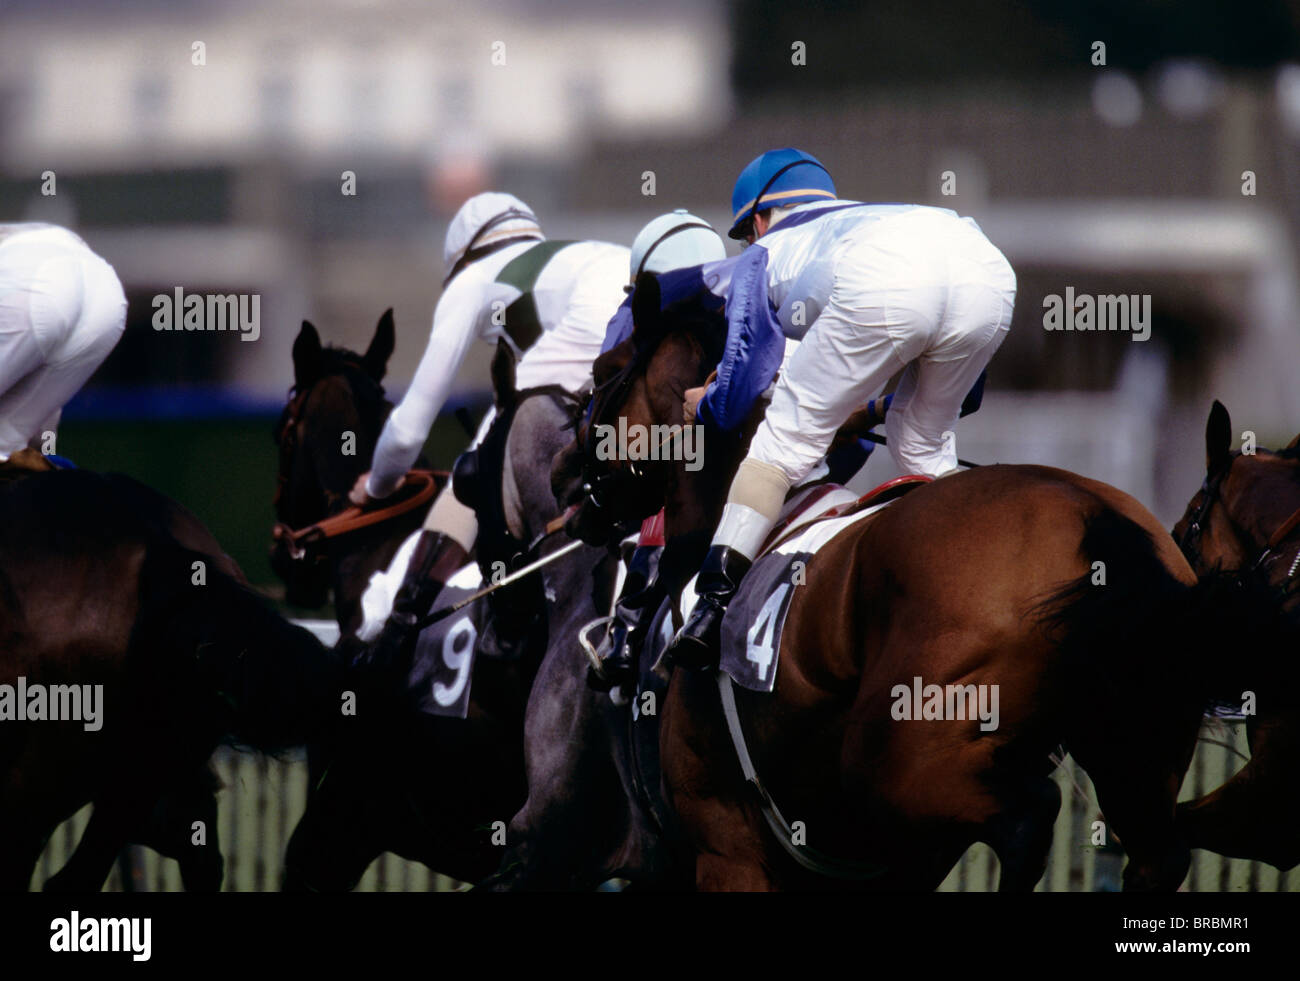 Jockeys on horses pull up their horses as they pass the finish line at race track Stock Photo